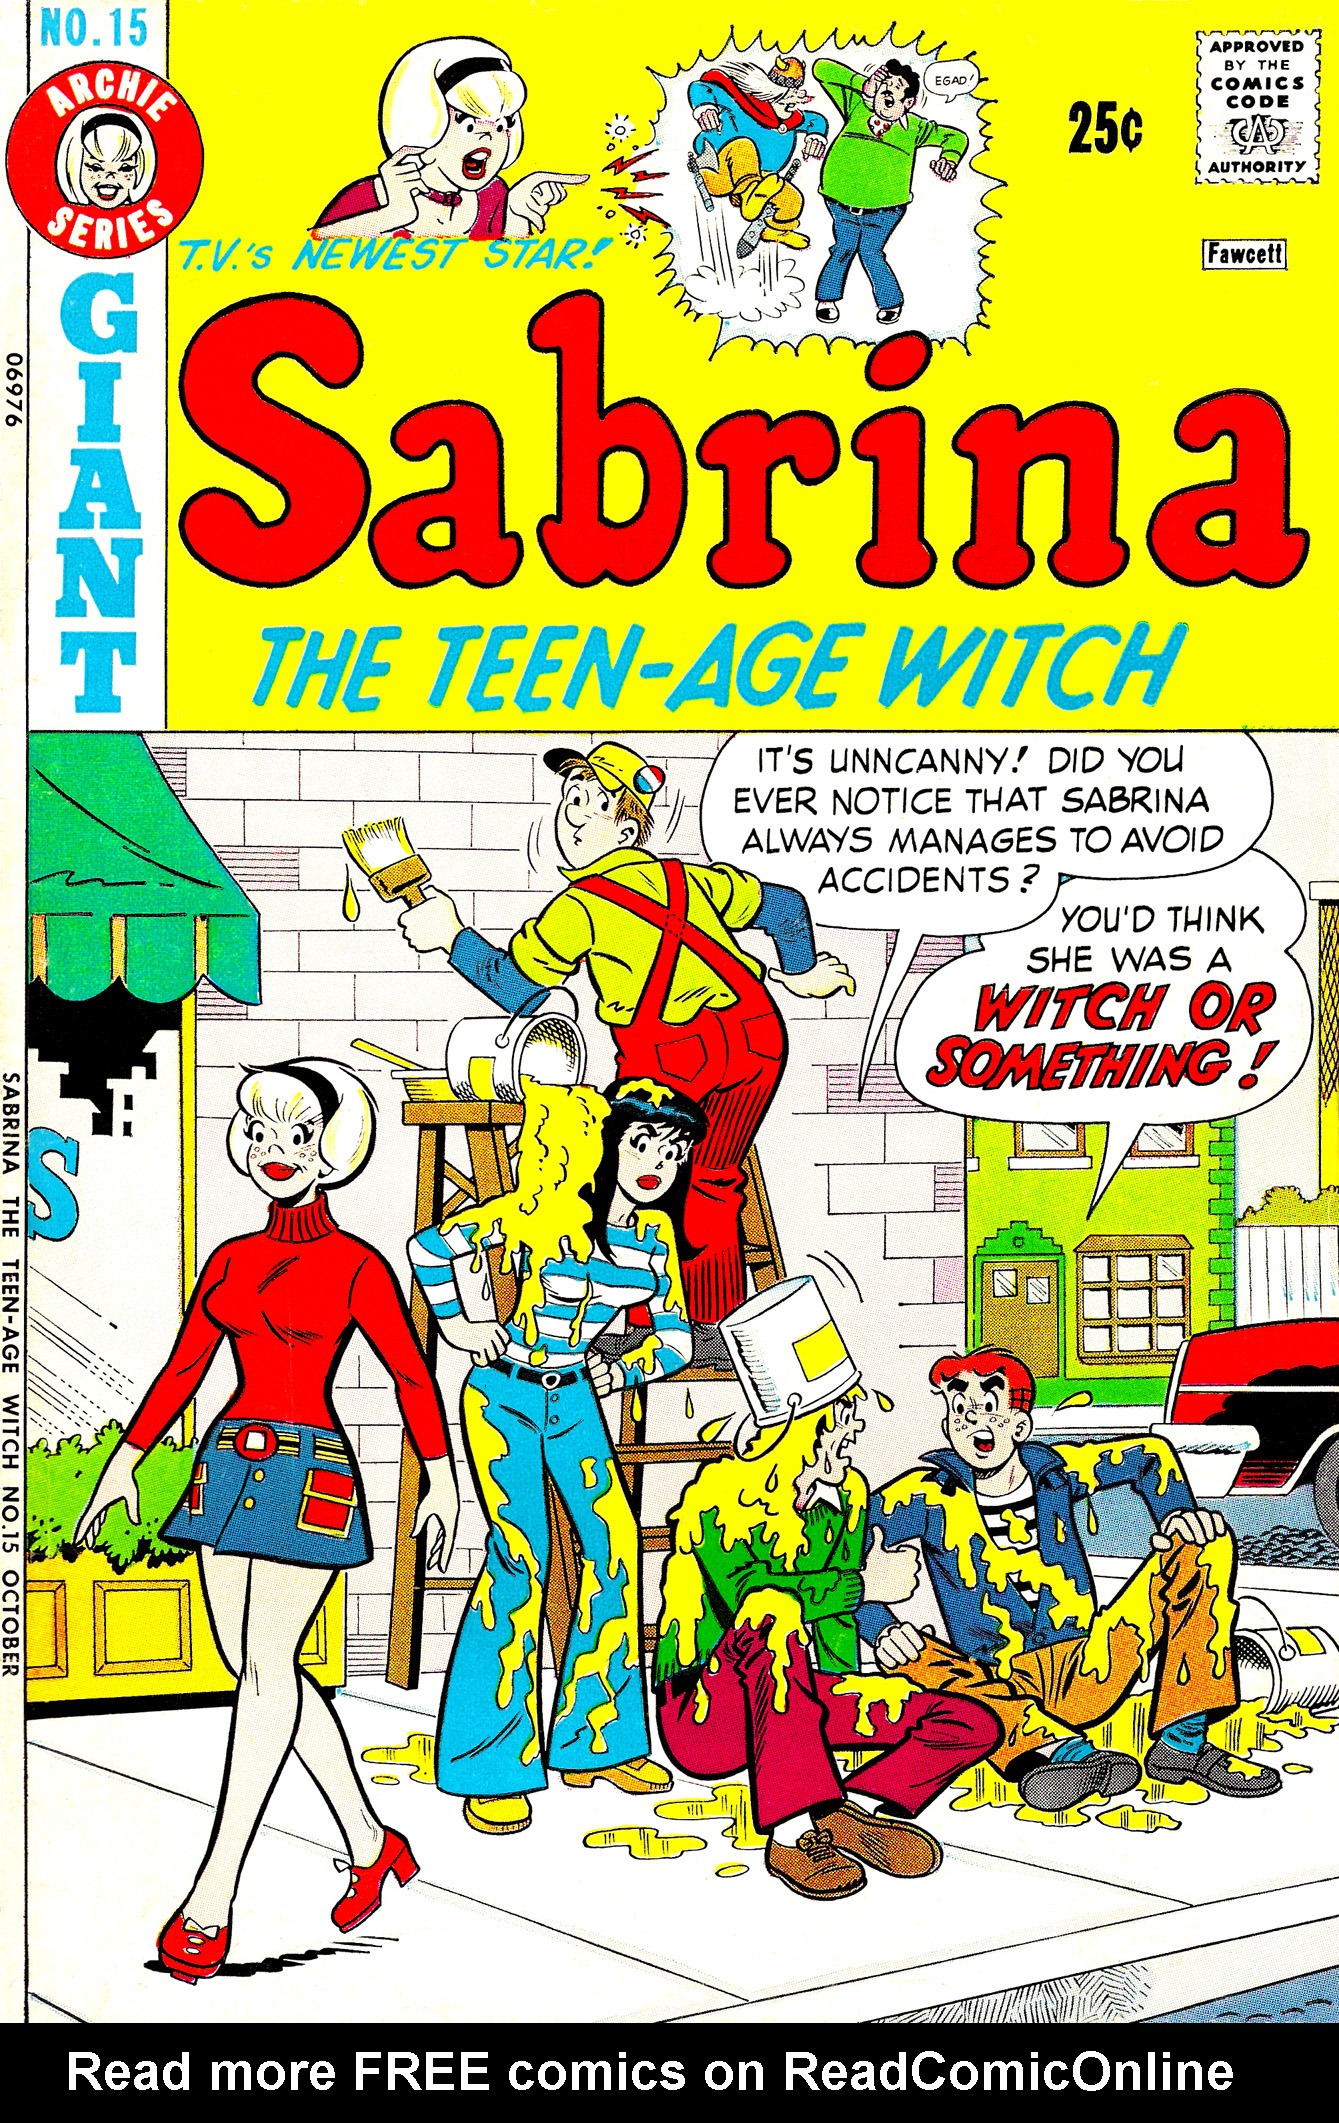 Sabrina The Teenage Witch (1971) Issue #15 #15 - English 1